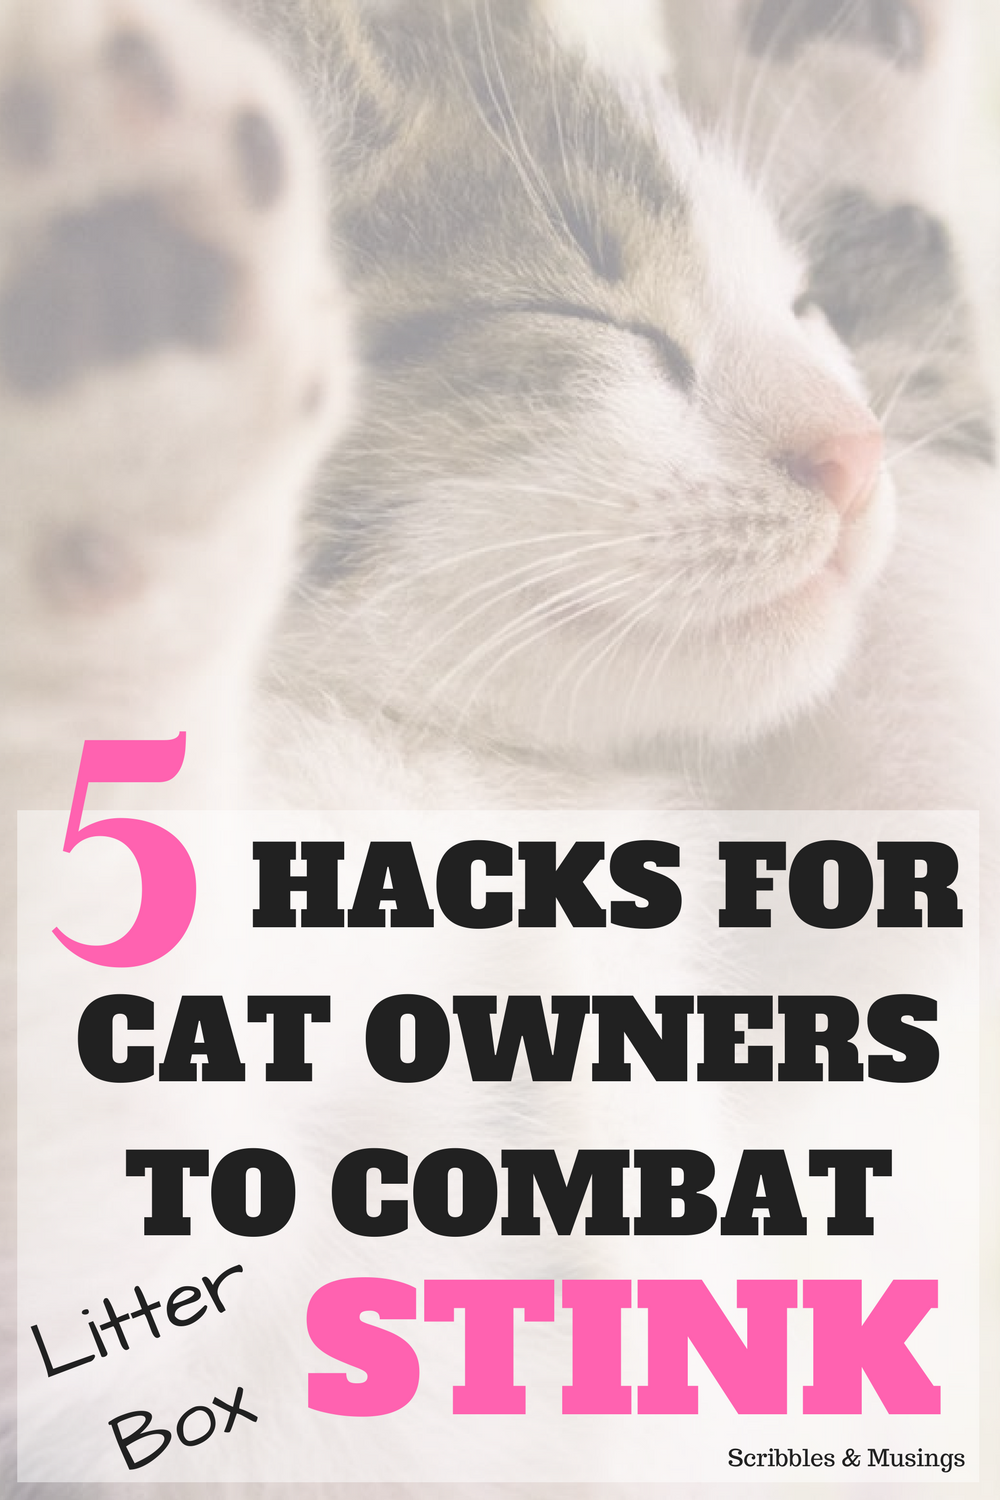 5 Litter Box Hacks - Scribbles & Musings - Do you struggle to keep your litter box smelling fresh and clean? Check out these 5 hacks for combating litter box stink.